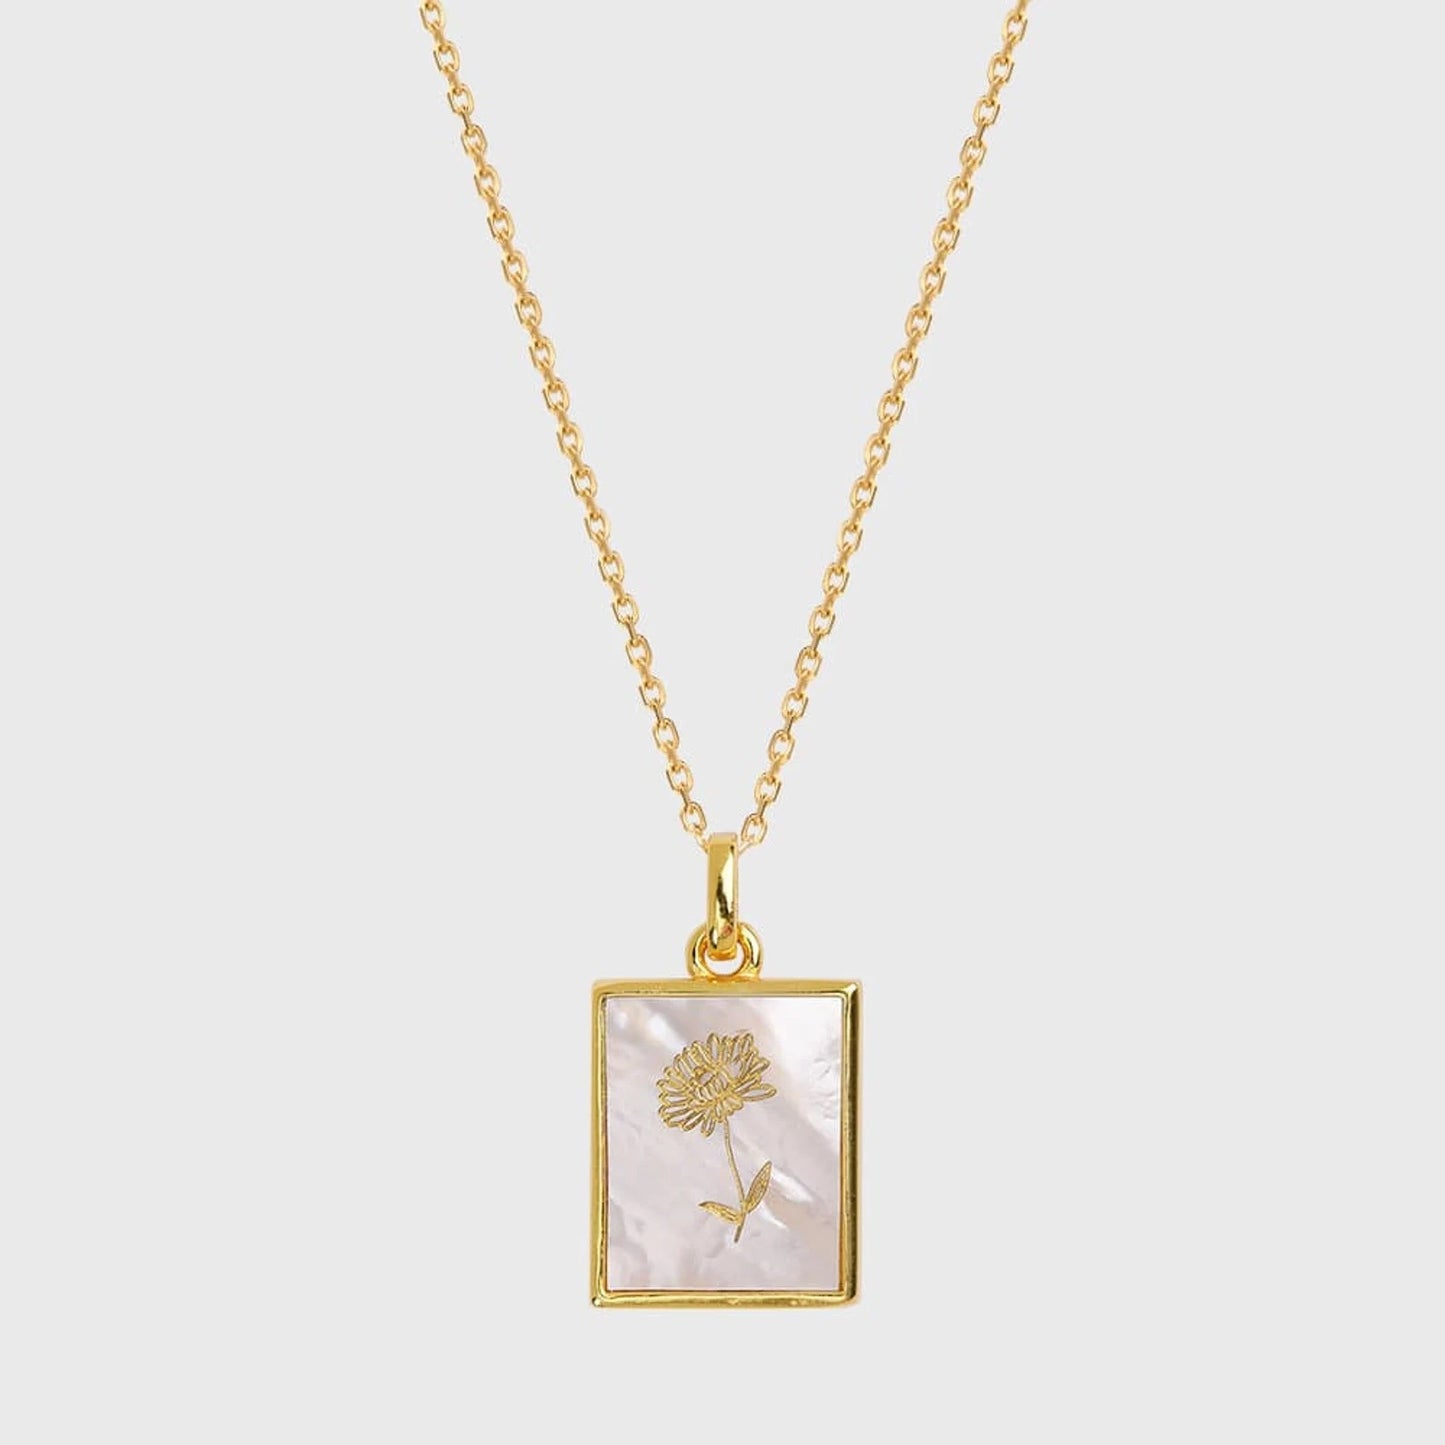 Birth Flower Square Pendant Necklace Dainty Gold Necklace